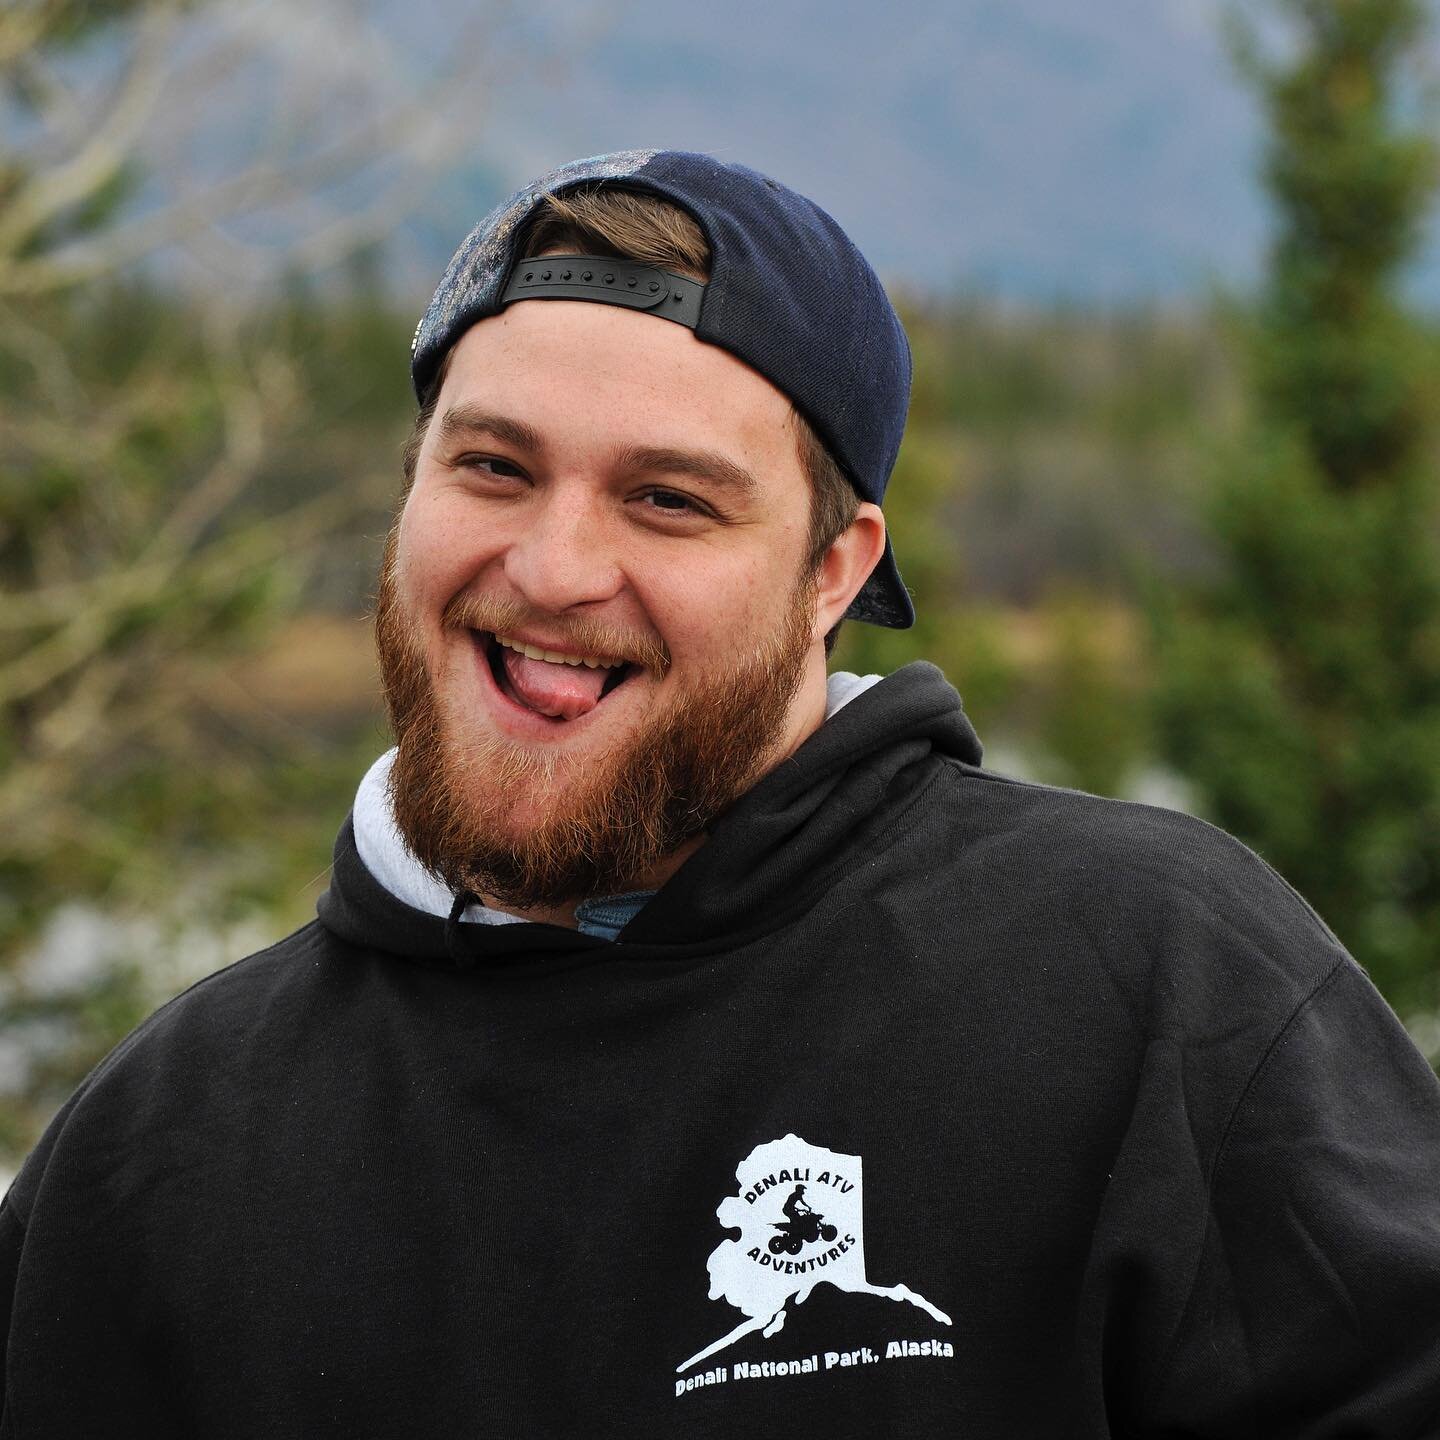 In 2014, Evan started here at Denali ATV as a young, naive, wild child! Over the seasons, he&rsquo;s grown from a greenhorn ATV guide to our General Manager. Evan&rsquo;s leadership, dedication and thoughtfulness drives the heart of our team! Thanks 